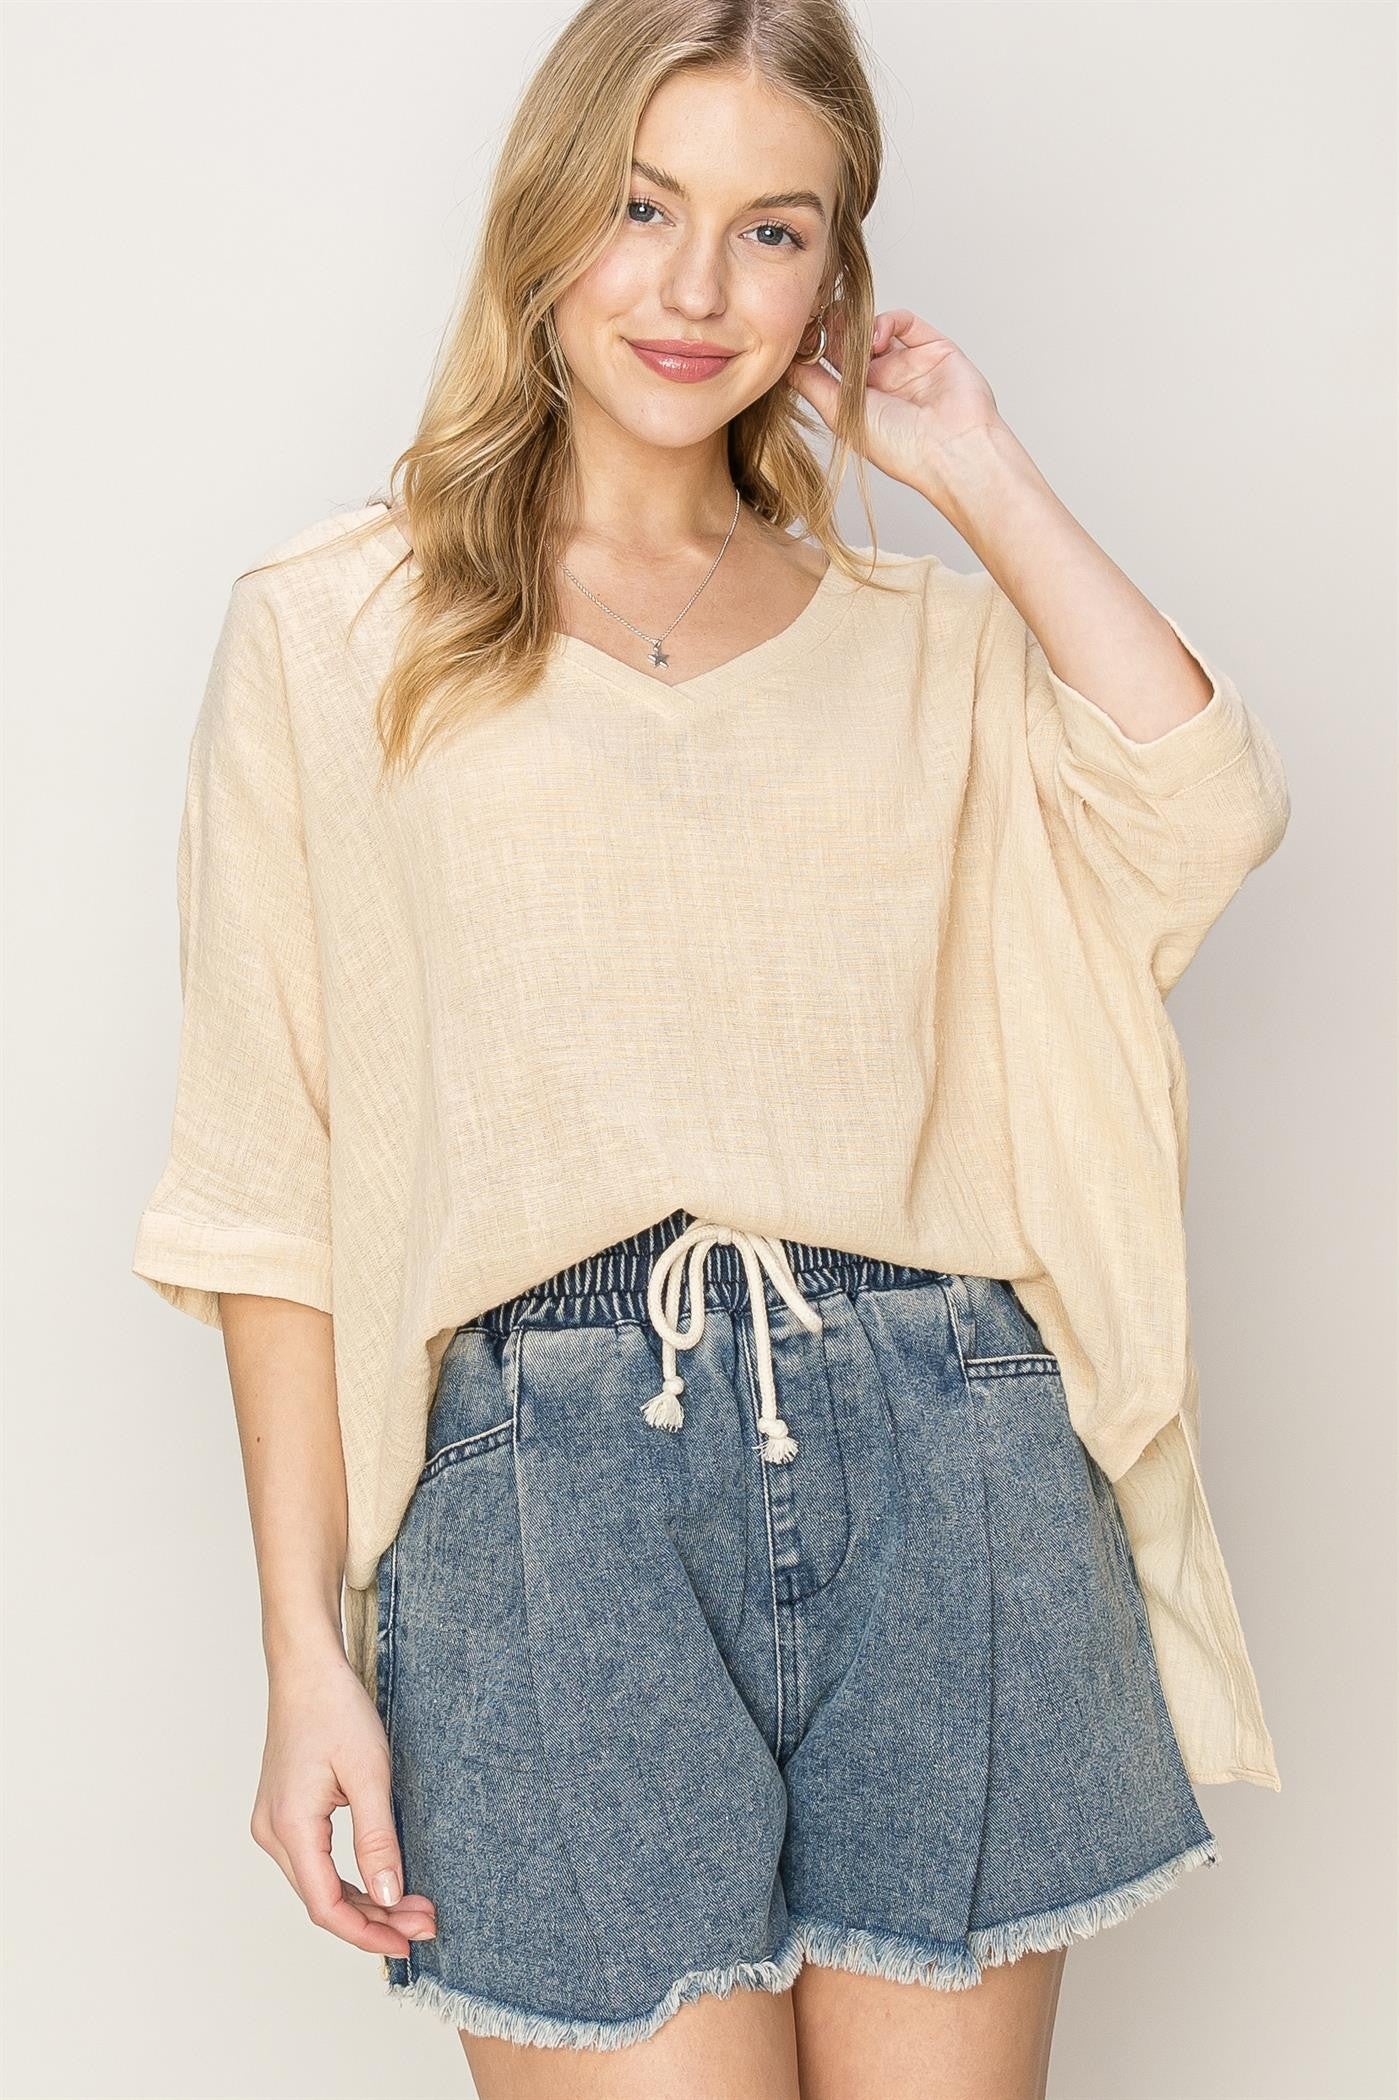 The Brianna Oversized Dolman Top